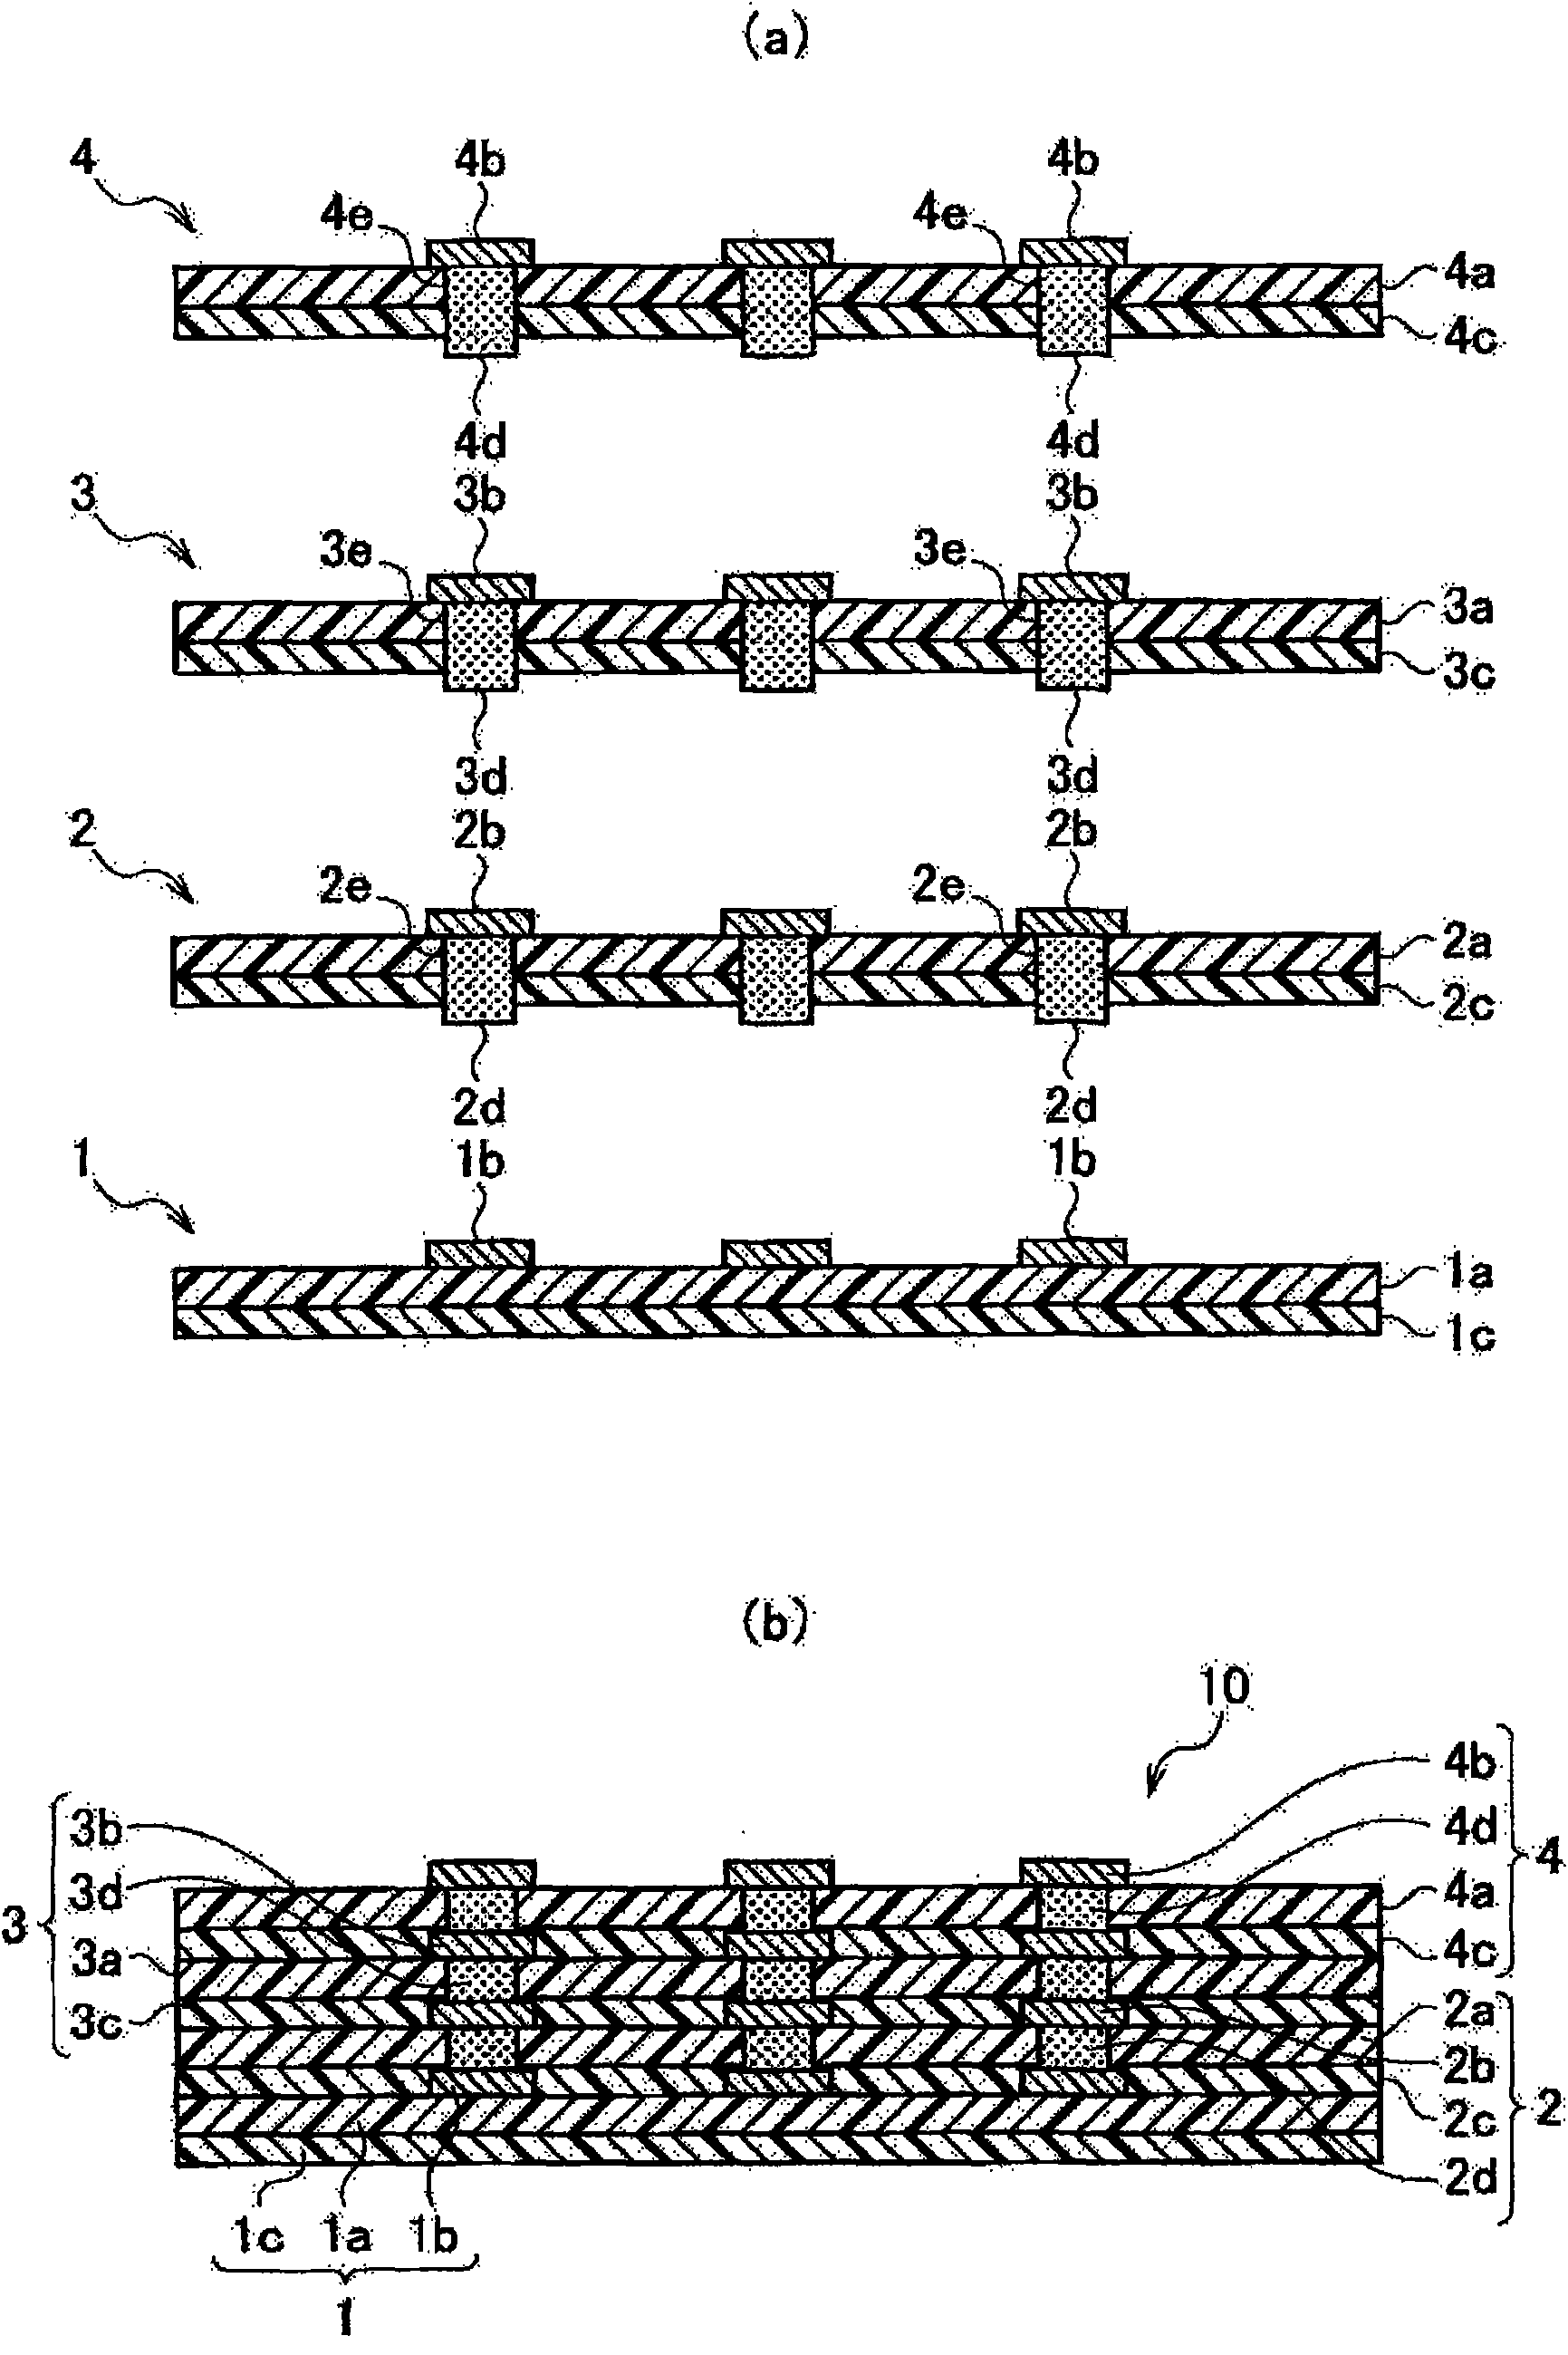 Laminated wiring board and method for manufacturing the same